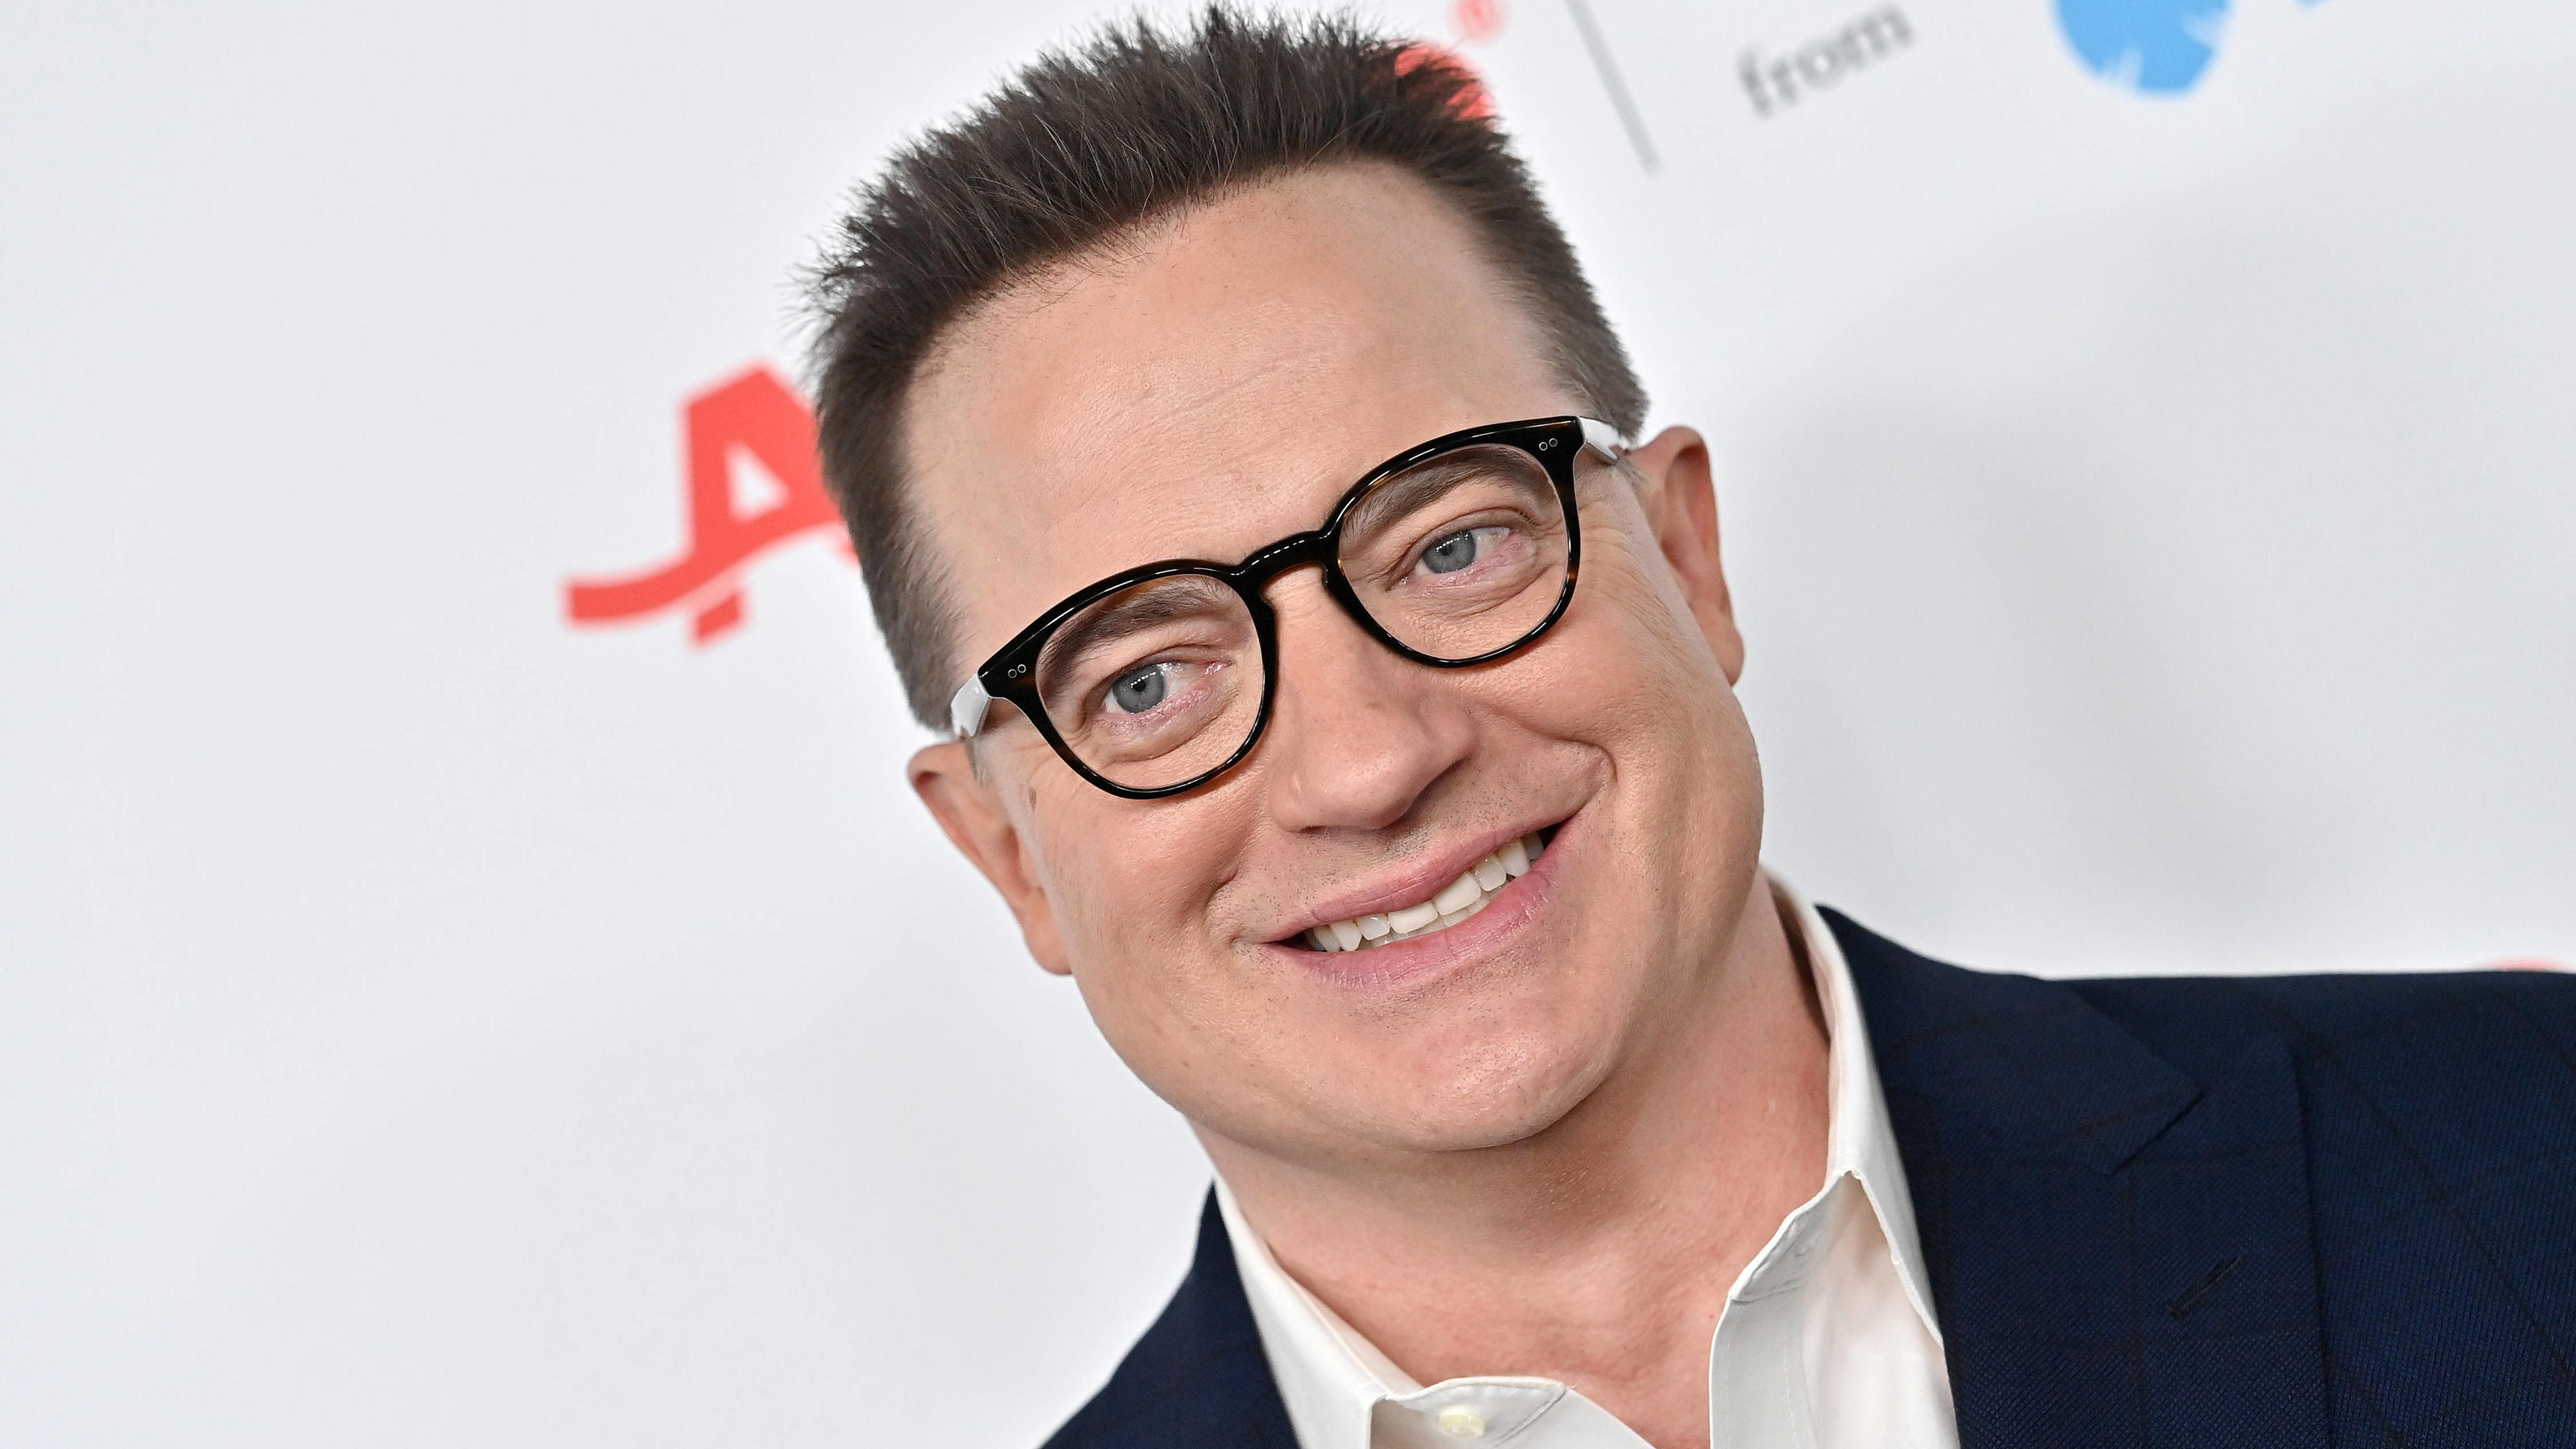 AARP The Magazine s 21st Annual Movies for Grownups Awards at Beverly Wilshire, A Four Seasons Hotel. Featuring: Brendan Fraser Where: Los Angeles, California, United States When: 28 Jan 2023 Credit: BauerGriffin/INSTARimages PUBLICATIONxNOTxINxUKxFR